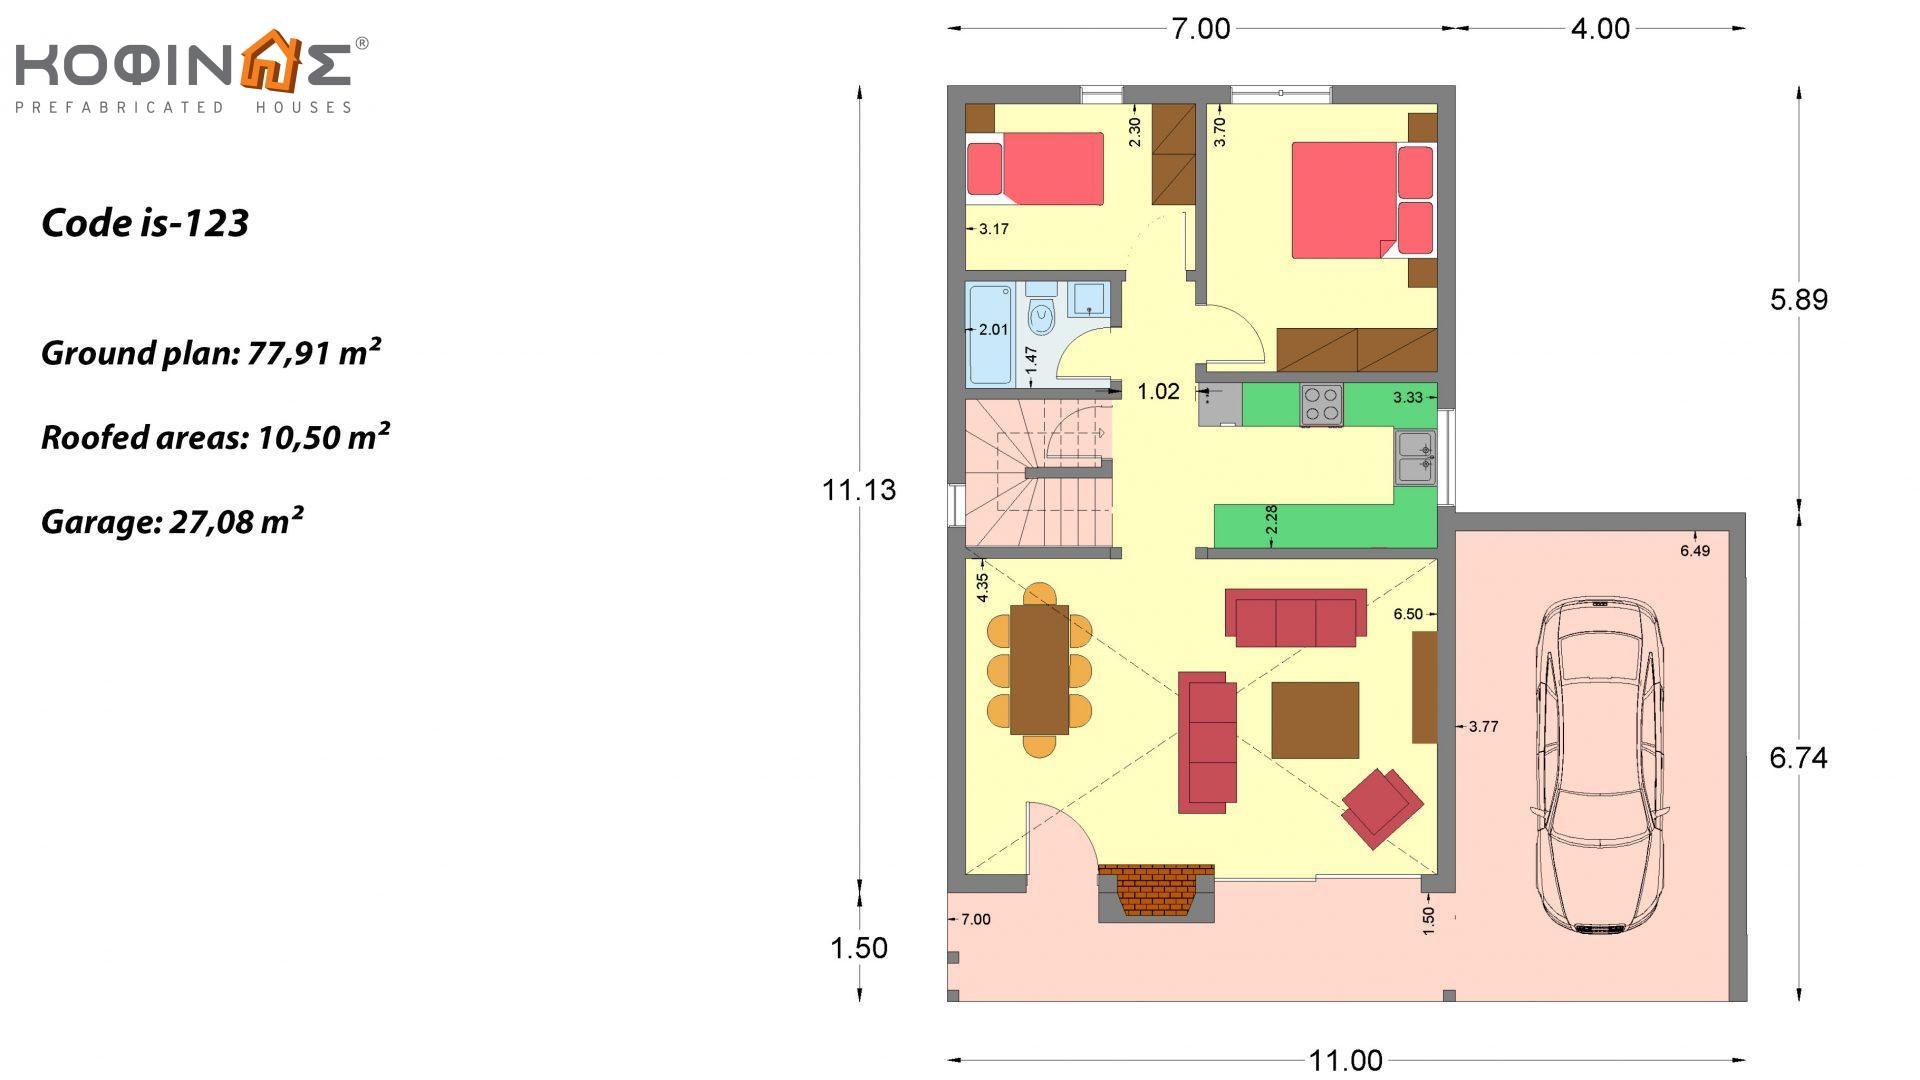 1-story house with attic IS-123, total surface of 123,25 m², +Garage surface 27. 08 m²(=150.33 m²), covered roofed areas 10,50 m²